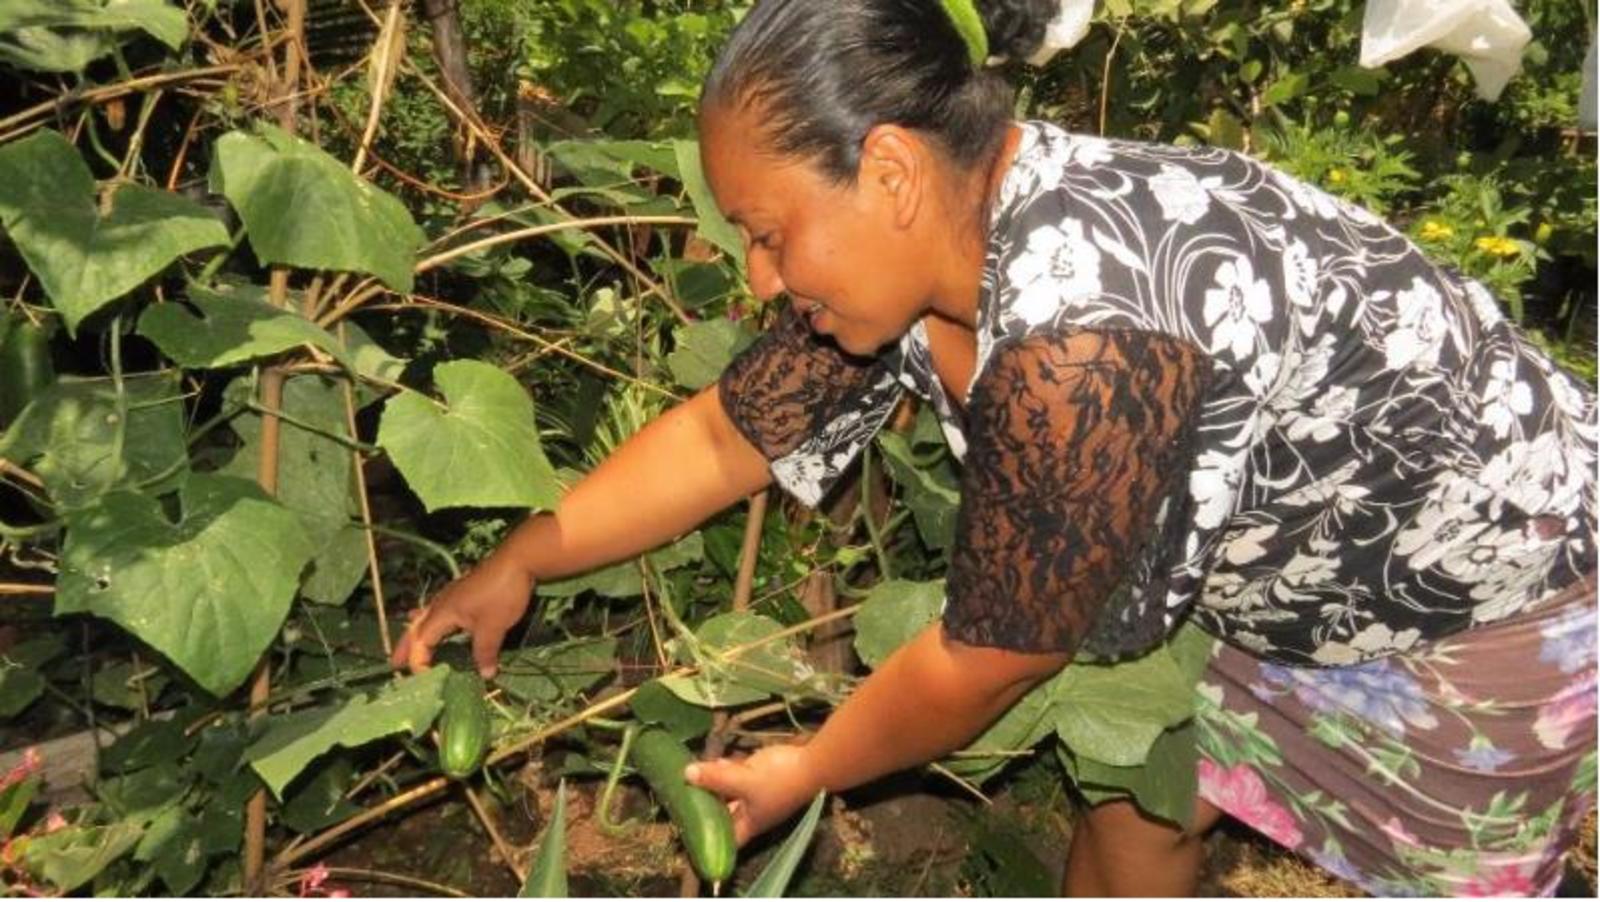 Organic agriculture improves nutrition and reduces female poverty in El Salvador